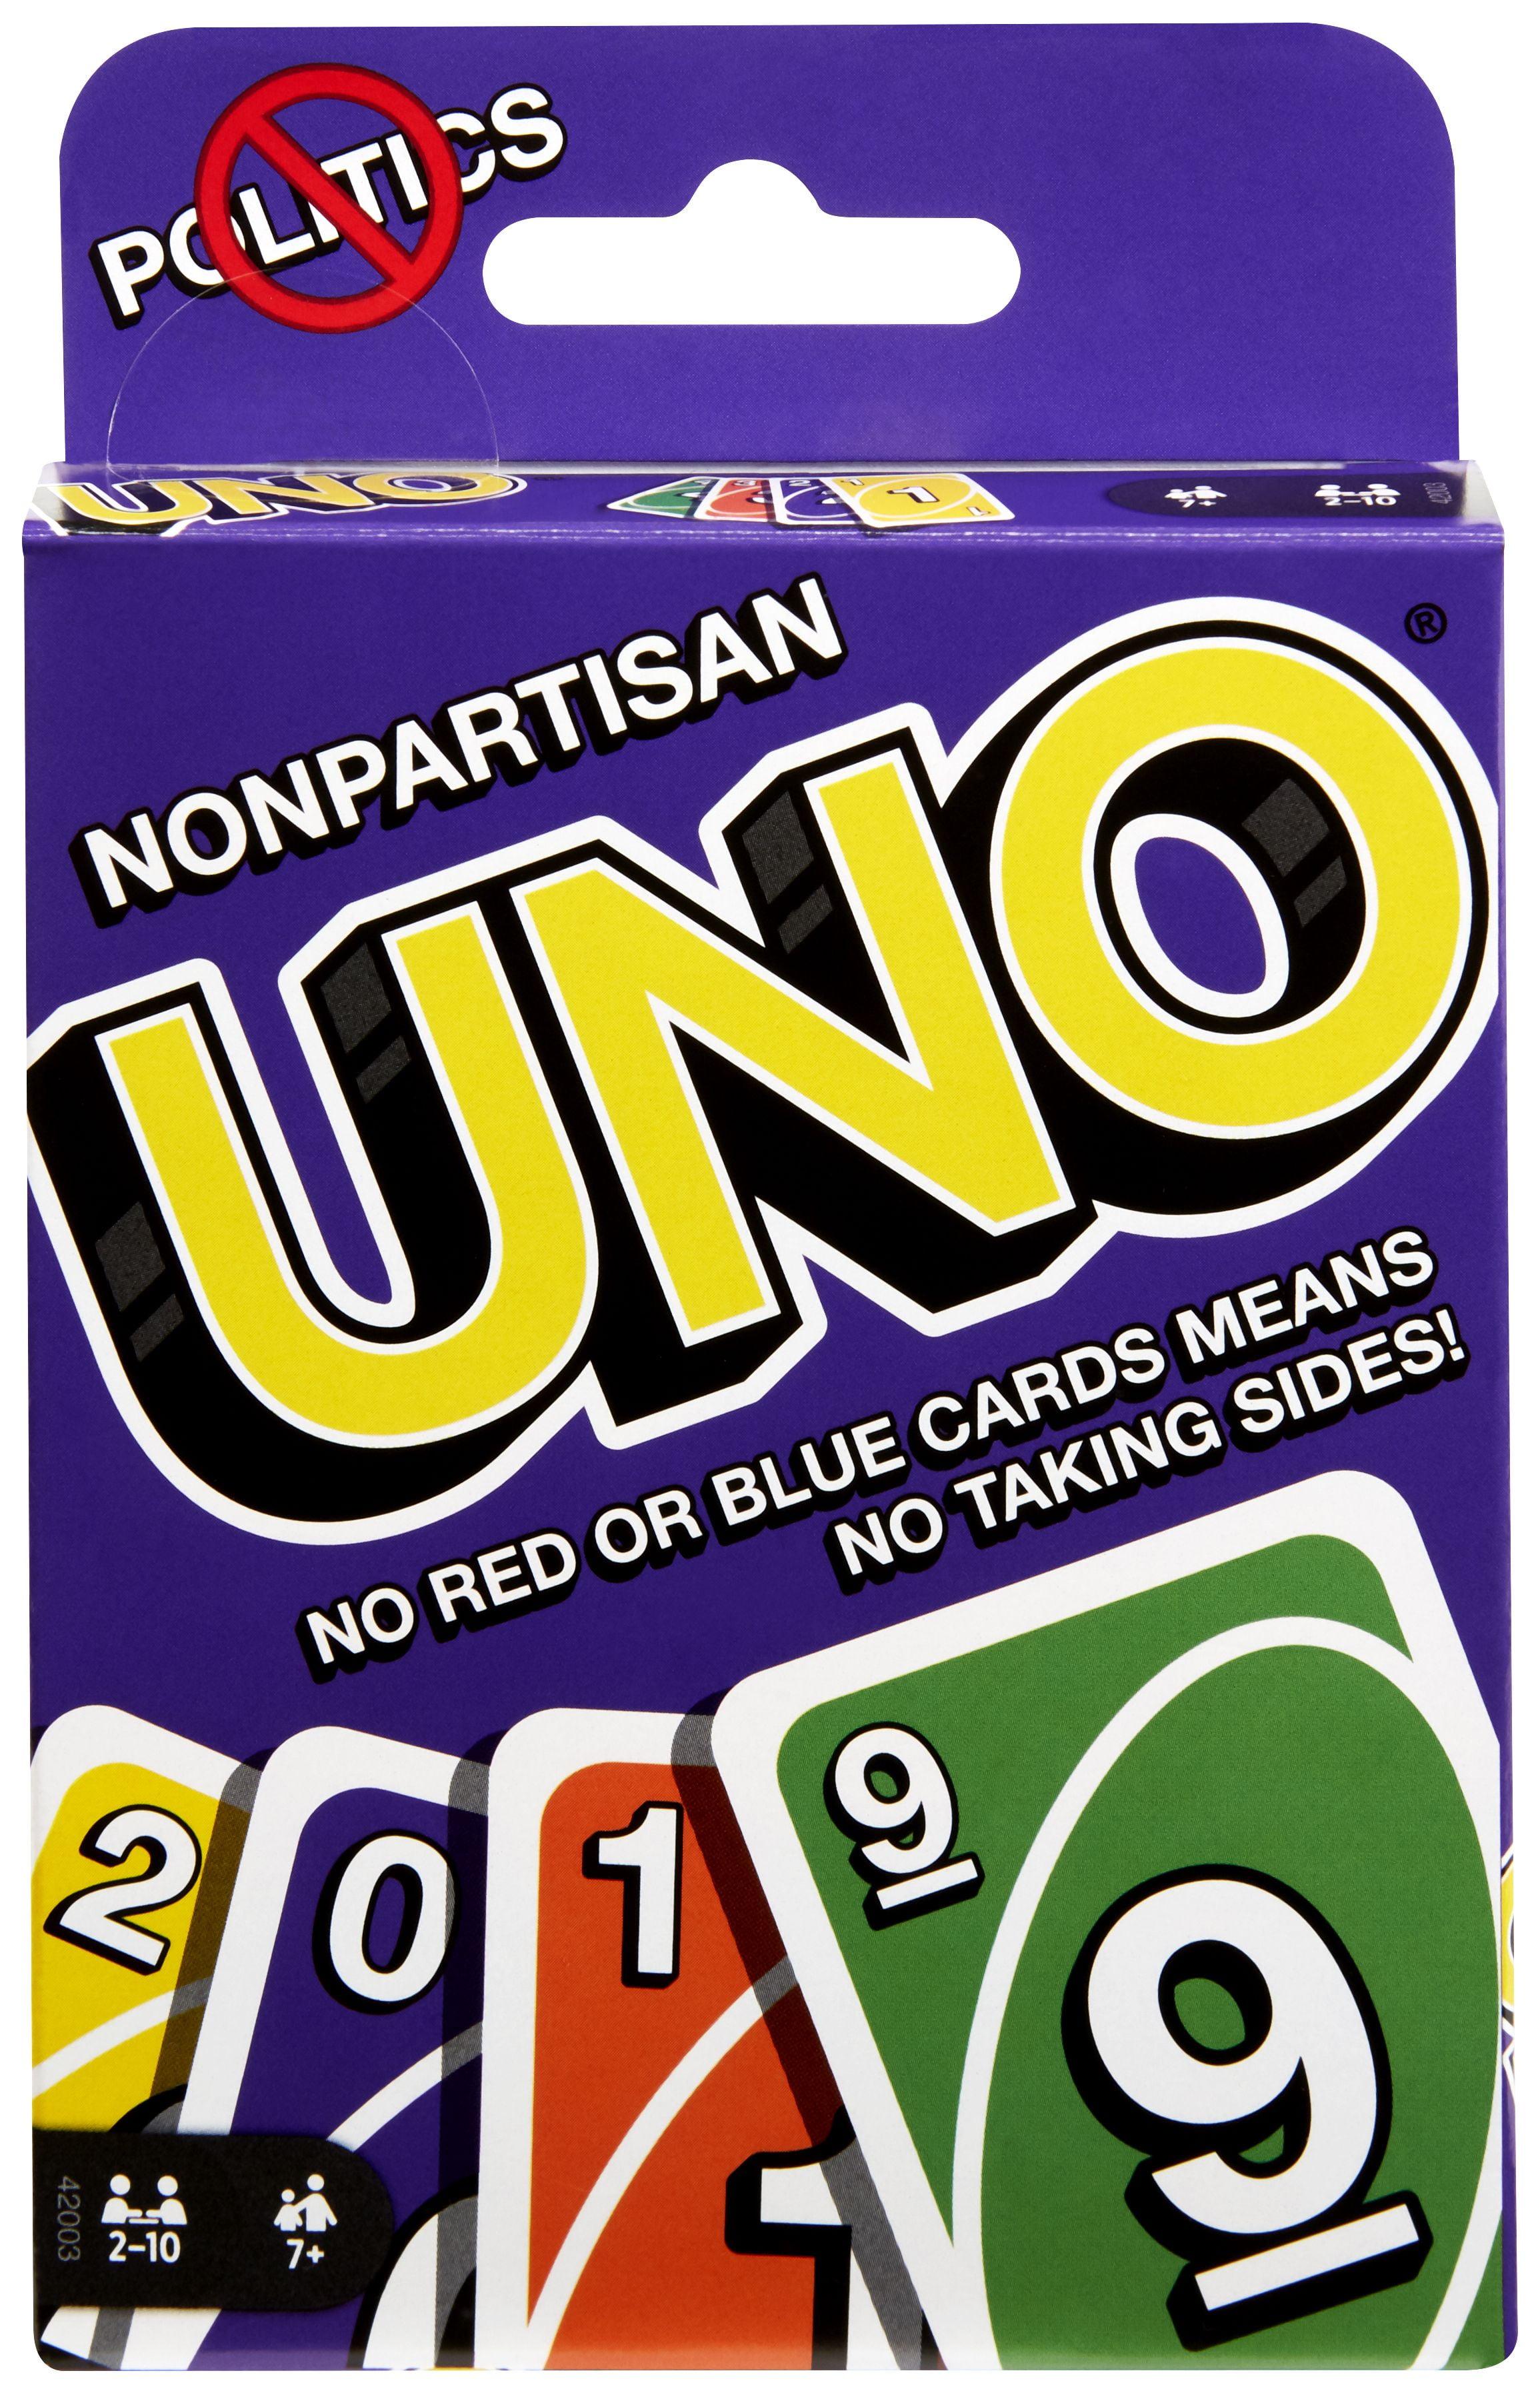 UNO Nonpartisan Card Game for 2-10 Players Ages 7Y+ 